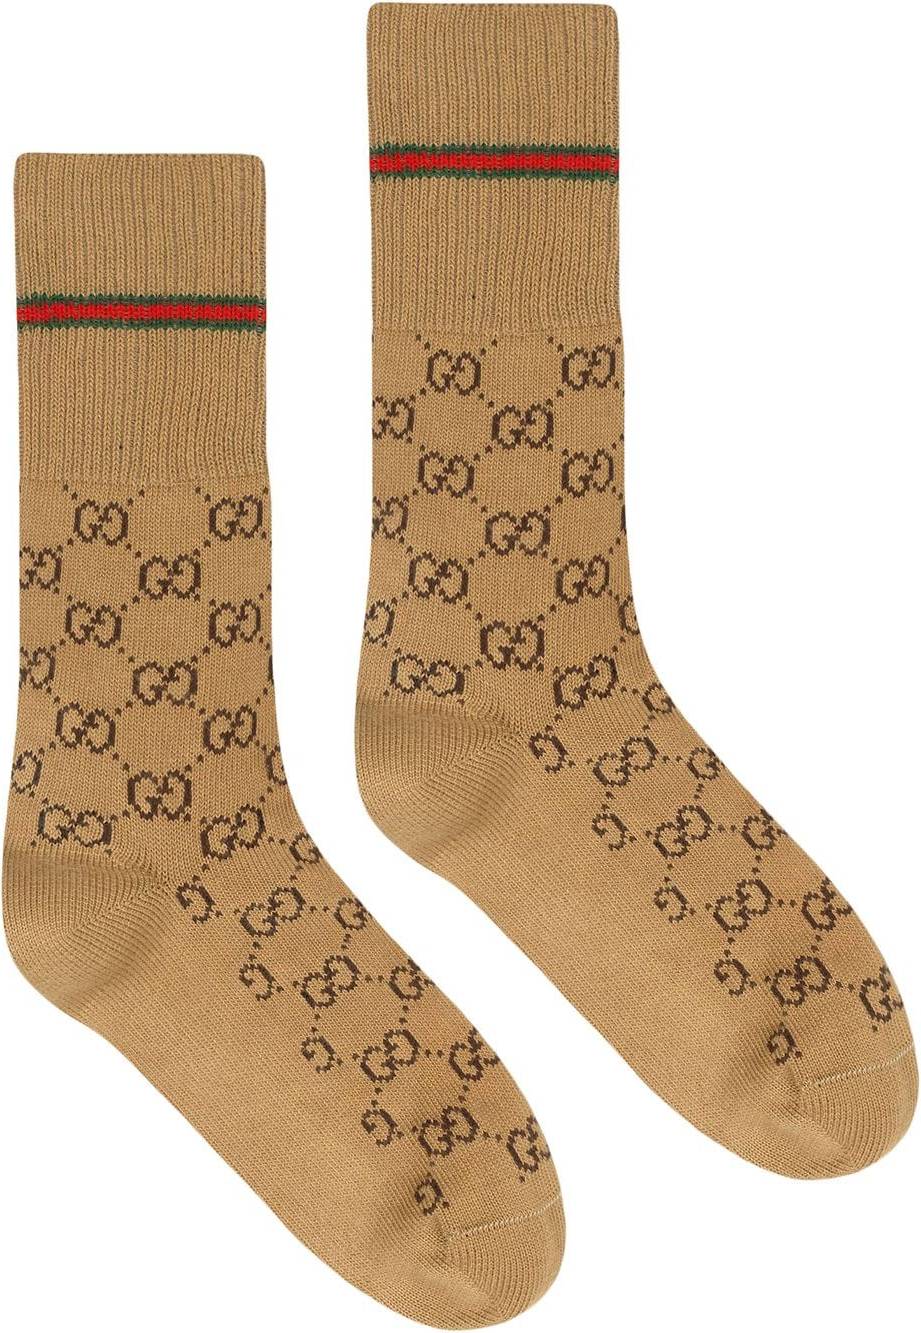 Gucci GG Web Socks - Camel/Brown • See best price